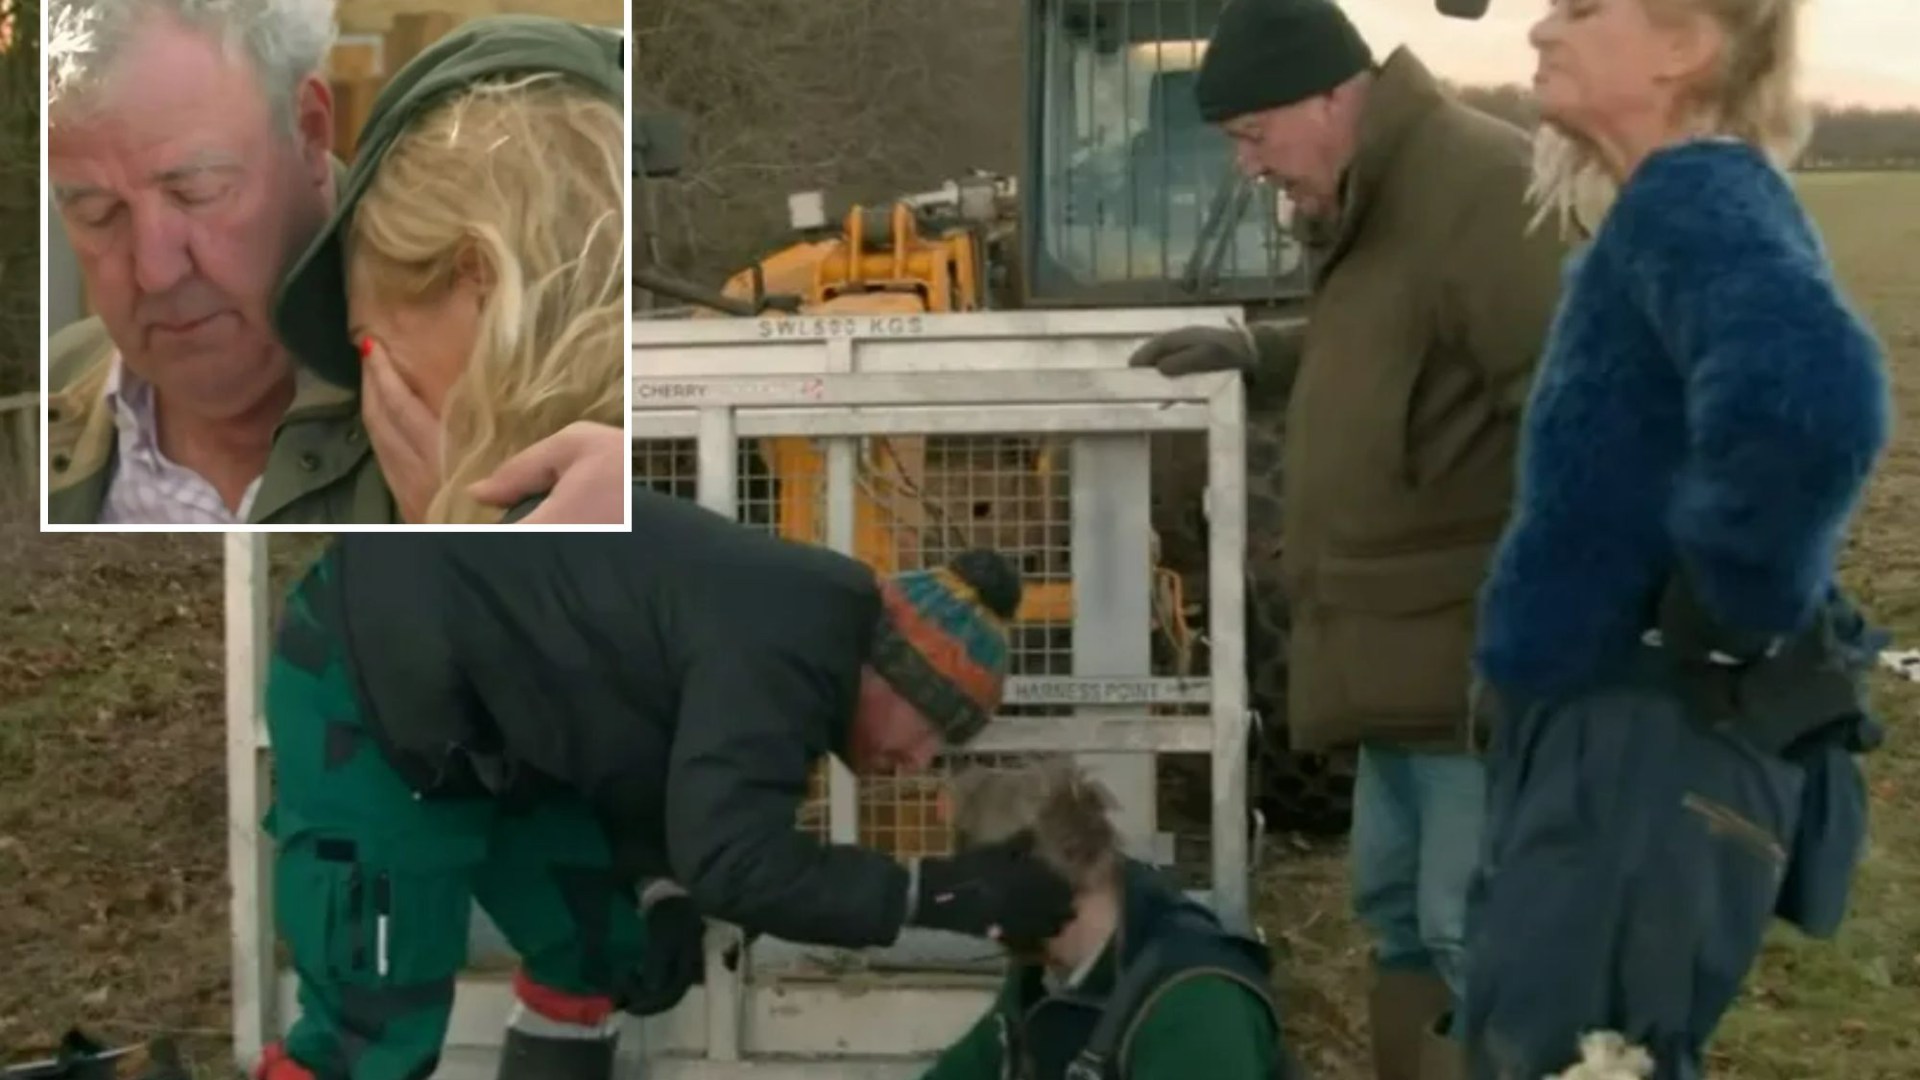 Jeremy Clarkson shaken as medics rush to treat Kaleb at Diddly Squat farm and girlfriend Lisa breaks down in tears [Video]